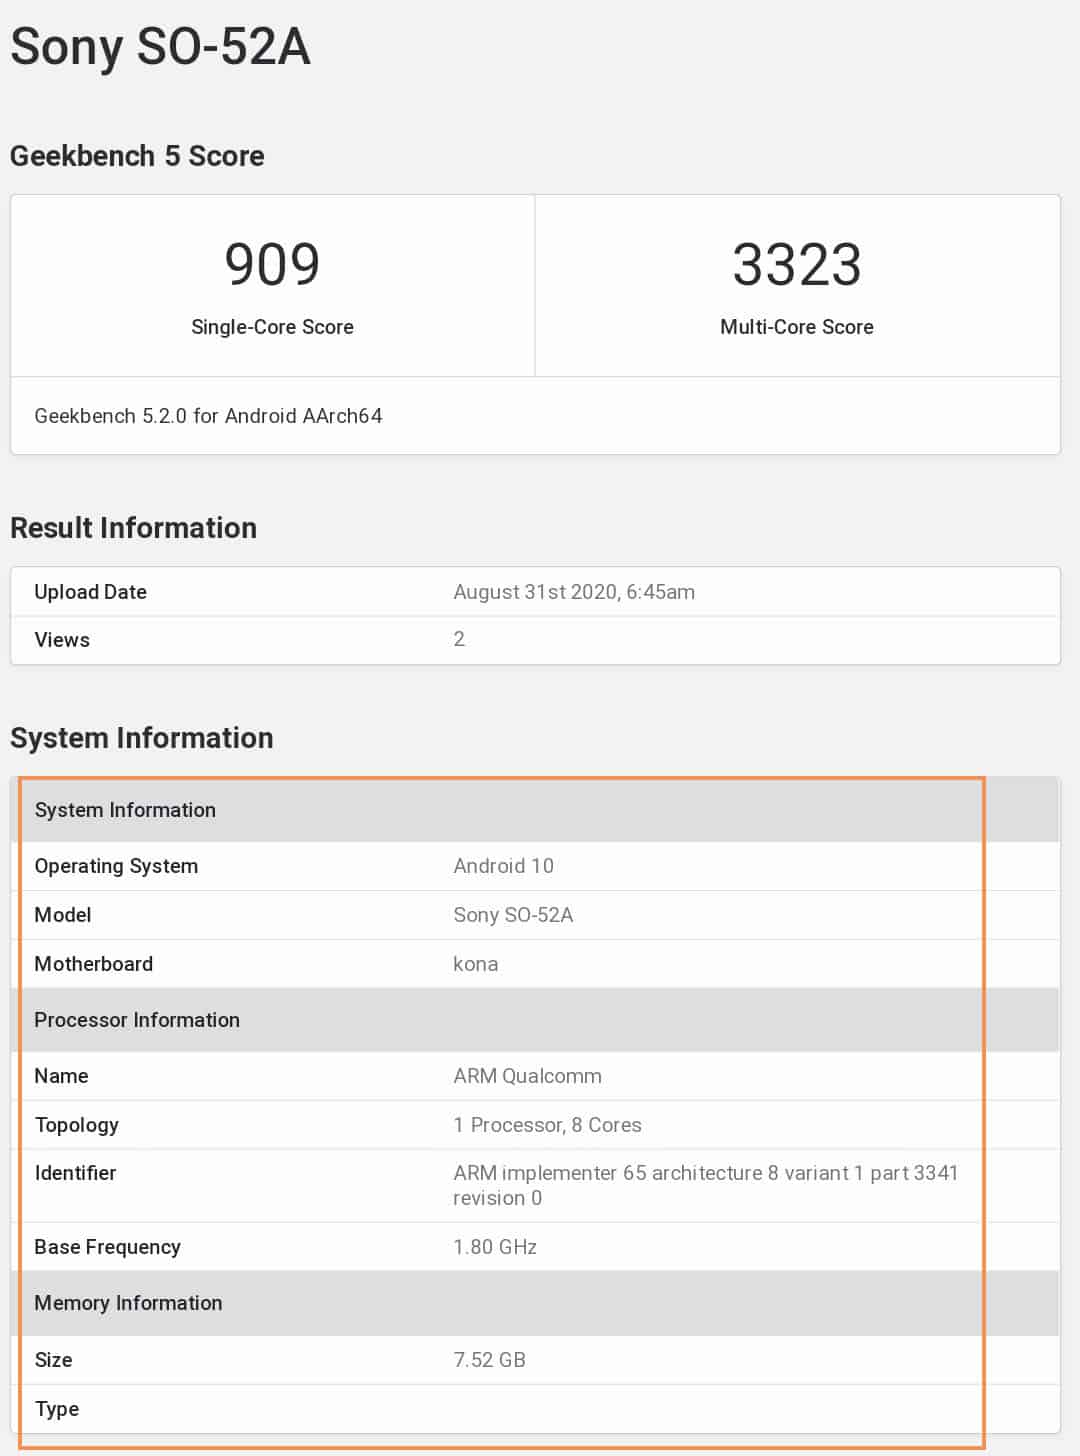 Sony Xperia 5 II with Snapdragon 865 and 8GB RAM spotted on Geekbench